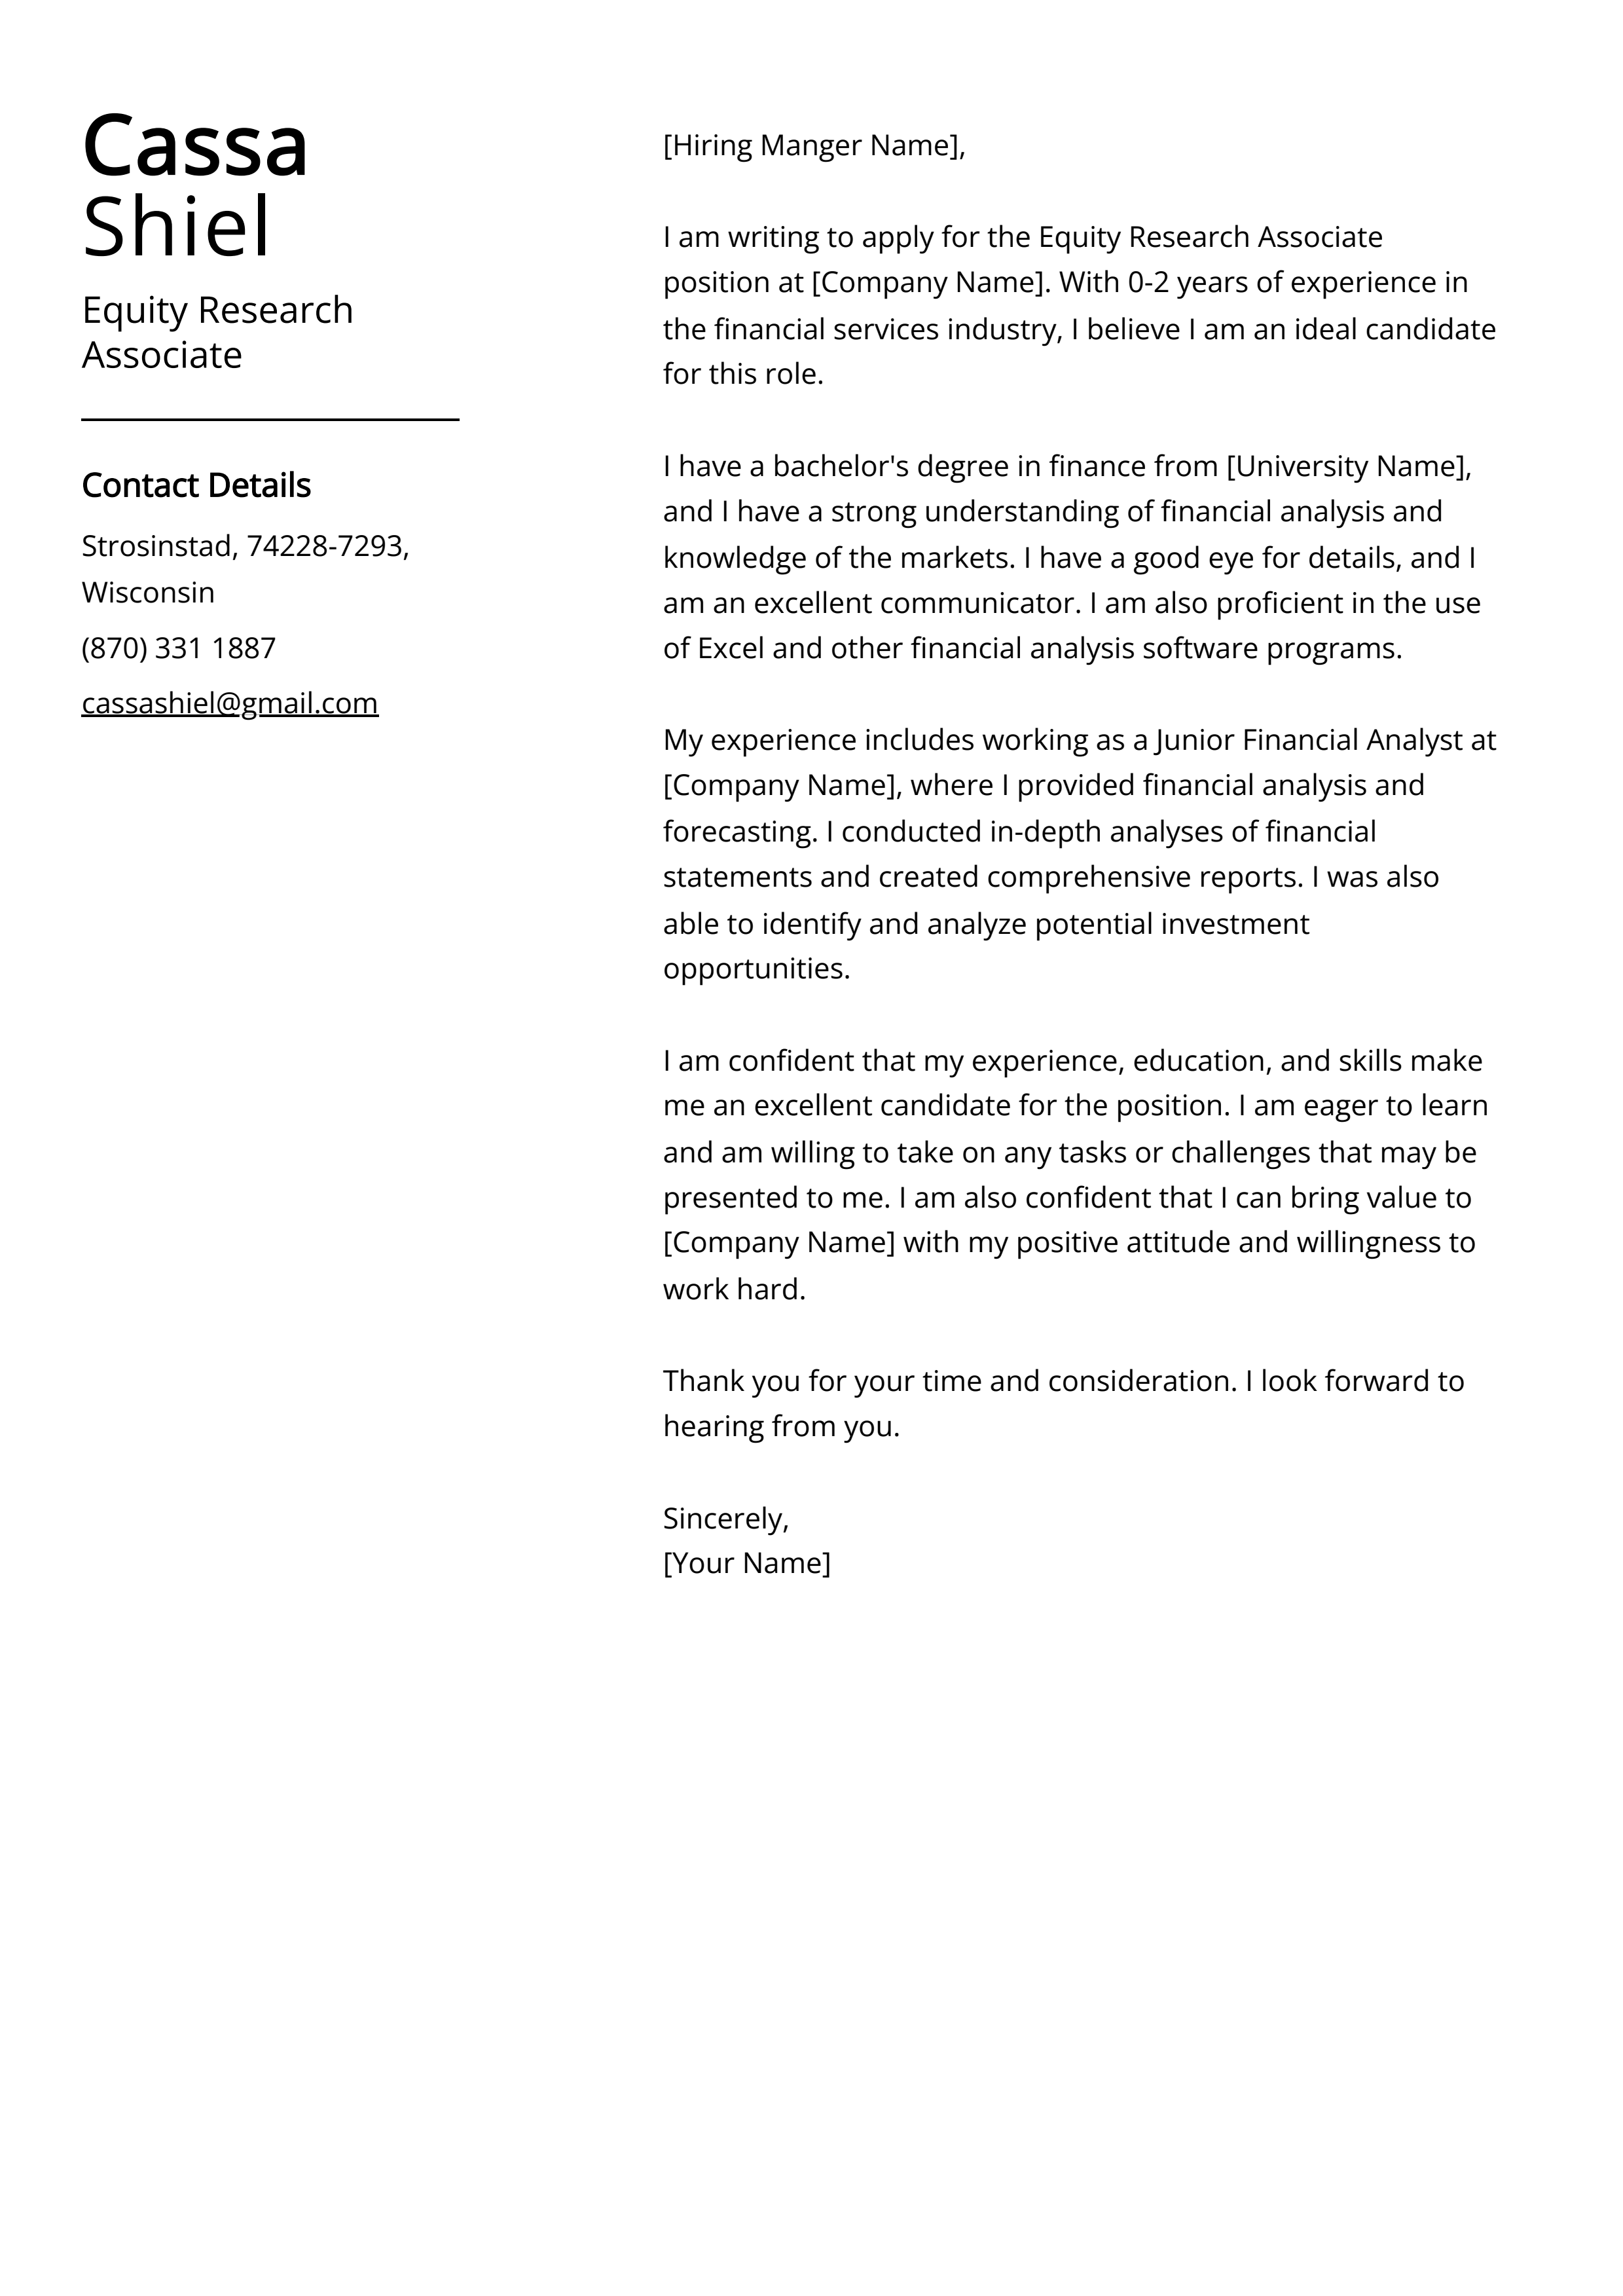 Equity Research Associate Cover Letter Example